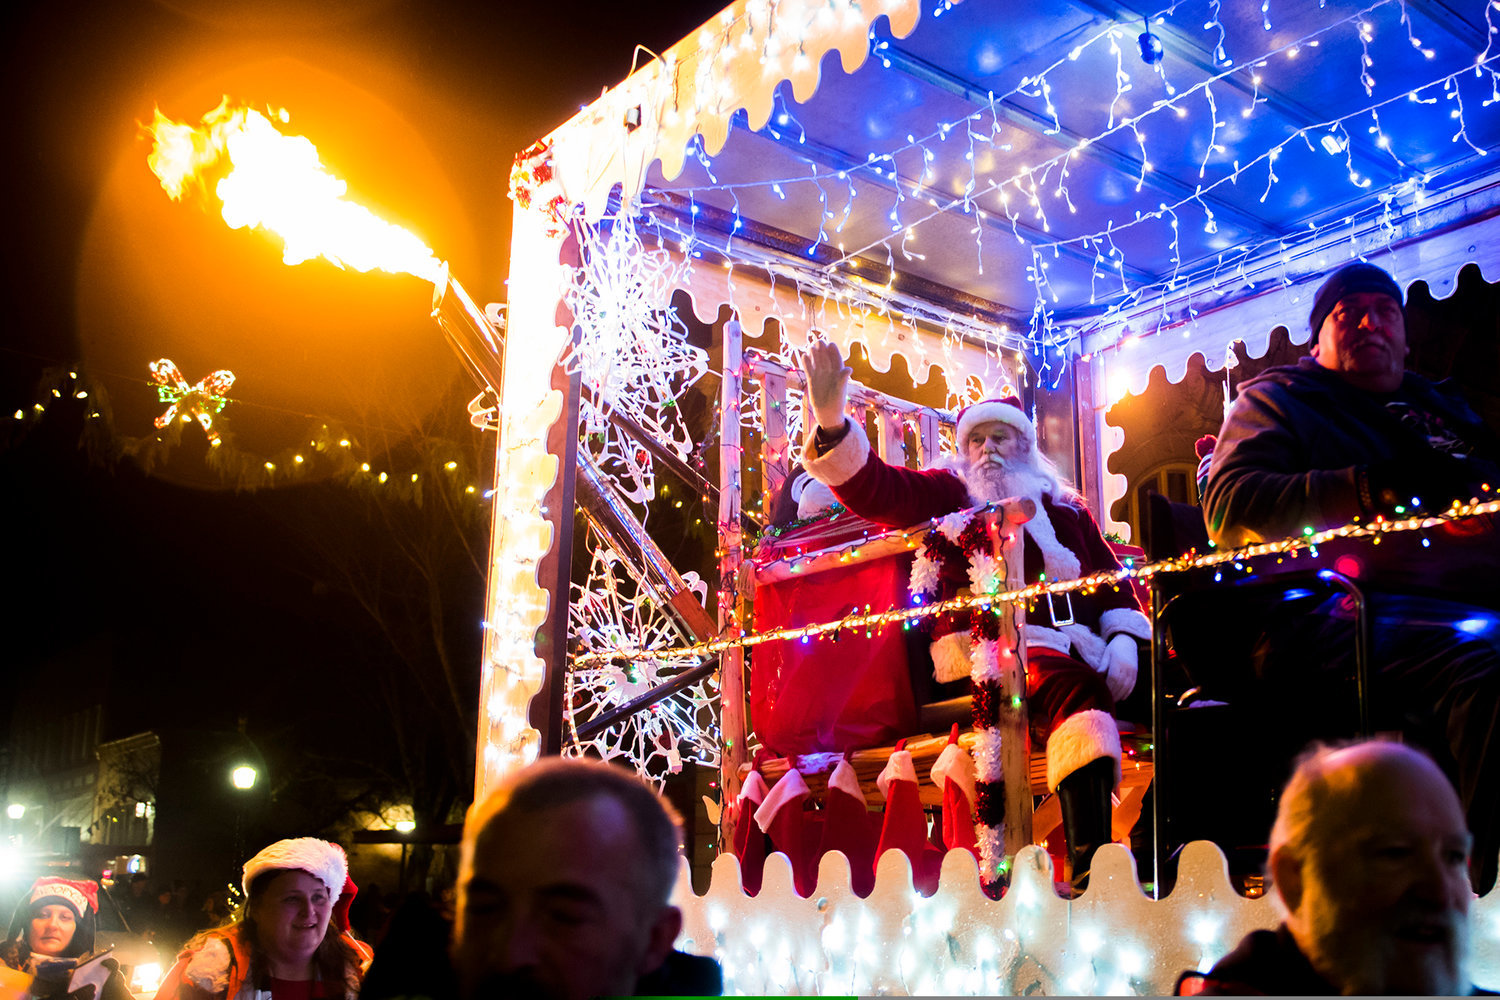 FILE PHOTO — Santa waves to crowds as flames shoot from the back of a semi during the annual Lighted Tractor Parade.